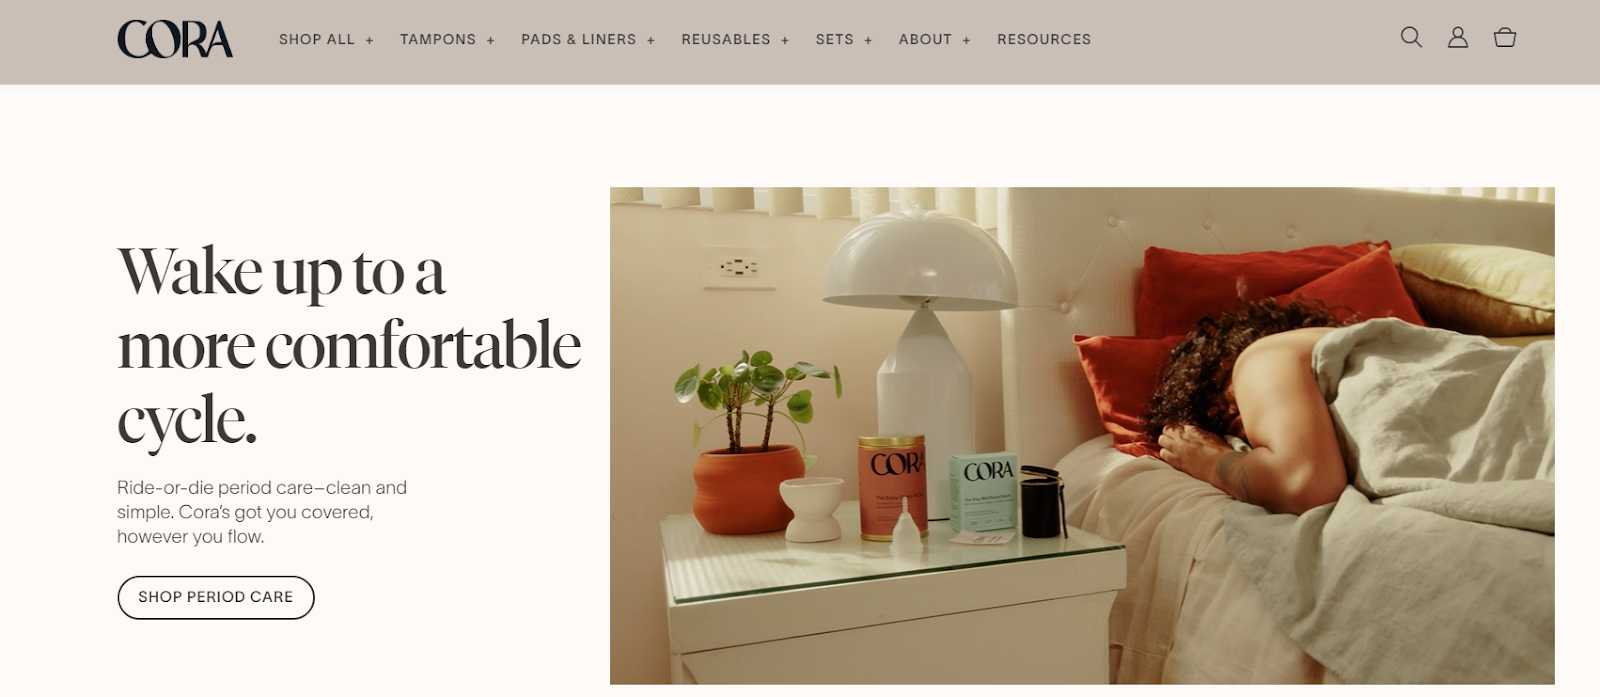 Cora is a San Francisco, CA-based women’s wellness brand whose product portfolio includes natural and organic tampons, pads, and other personal care.